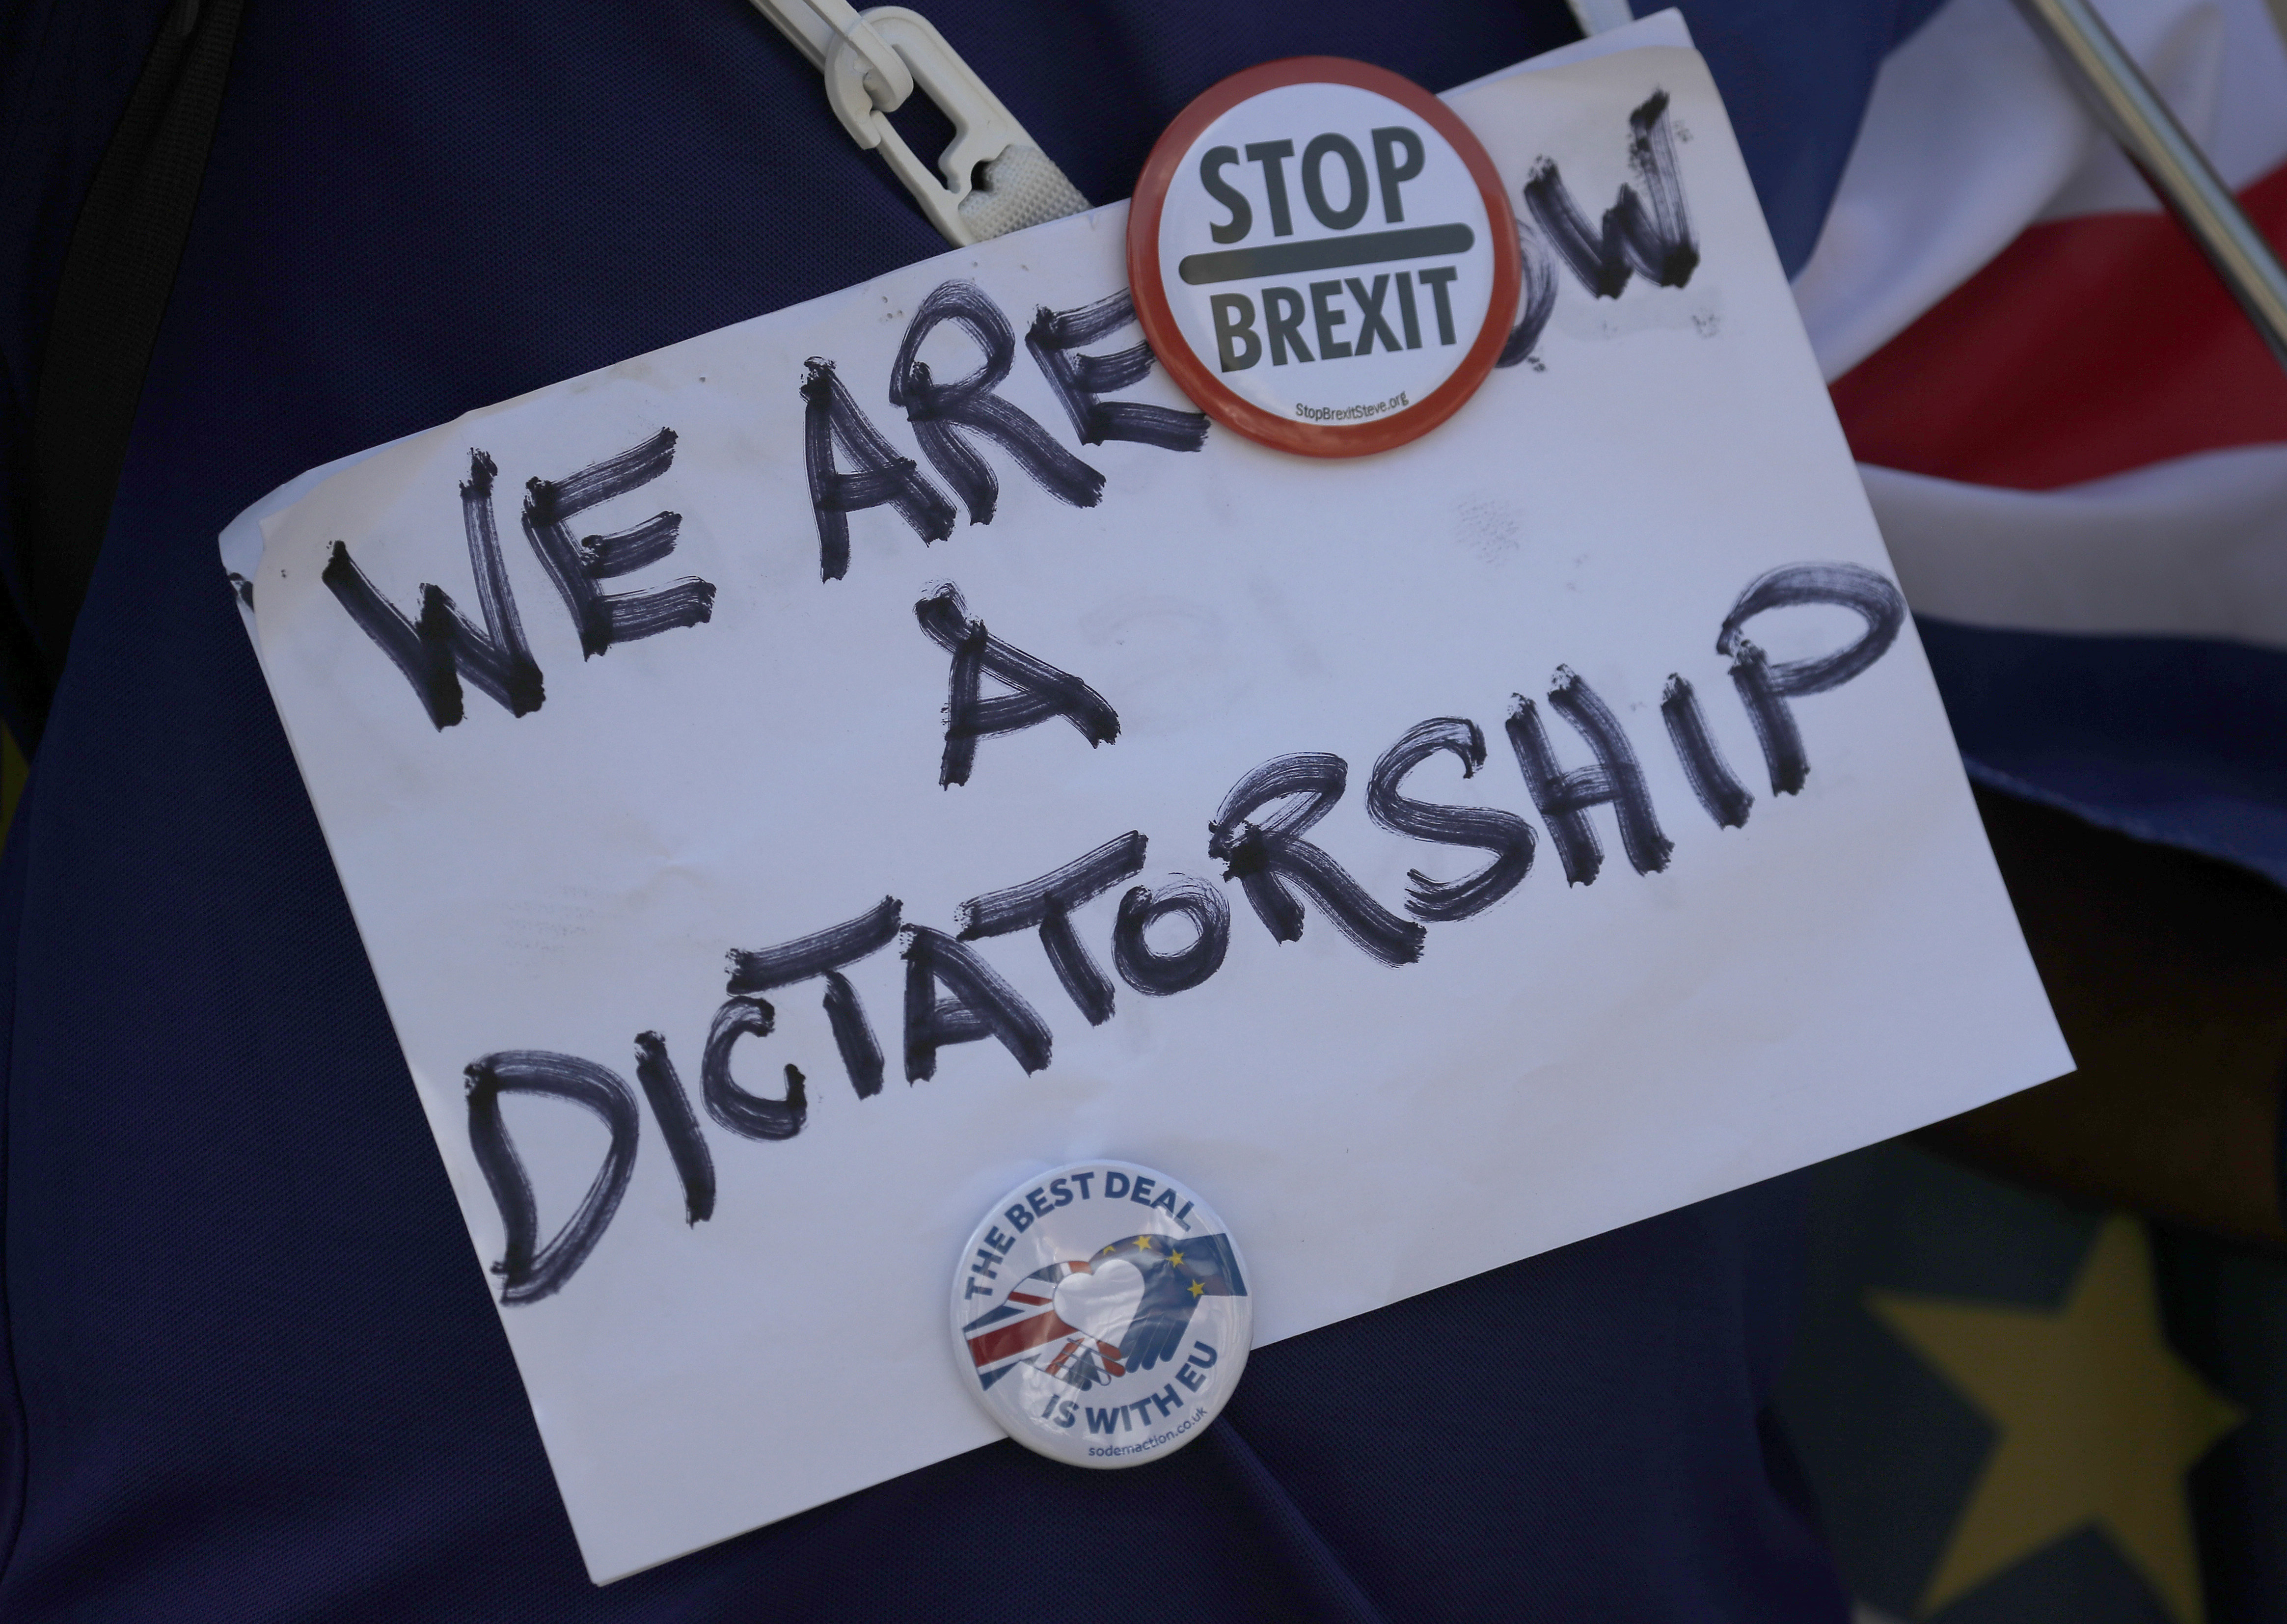 An Anti Brexit protestor shows a placard in London, Thursday, Aug. 29, 2019. Political opposition to Prime Minister Boris Johnson's move to suspend Parliament is crystalizing, with protests around Britain and a petition to block the move gaining more than 1 million signatures.(AP Photo/Frank Augstein)